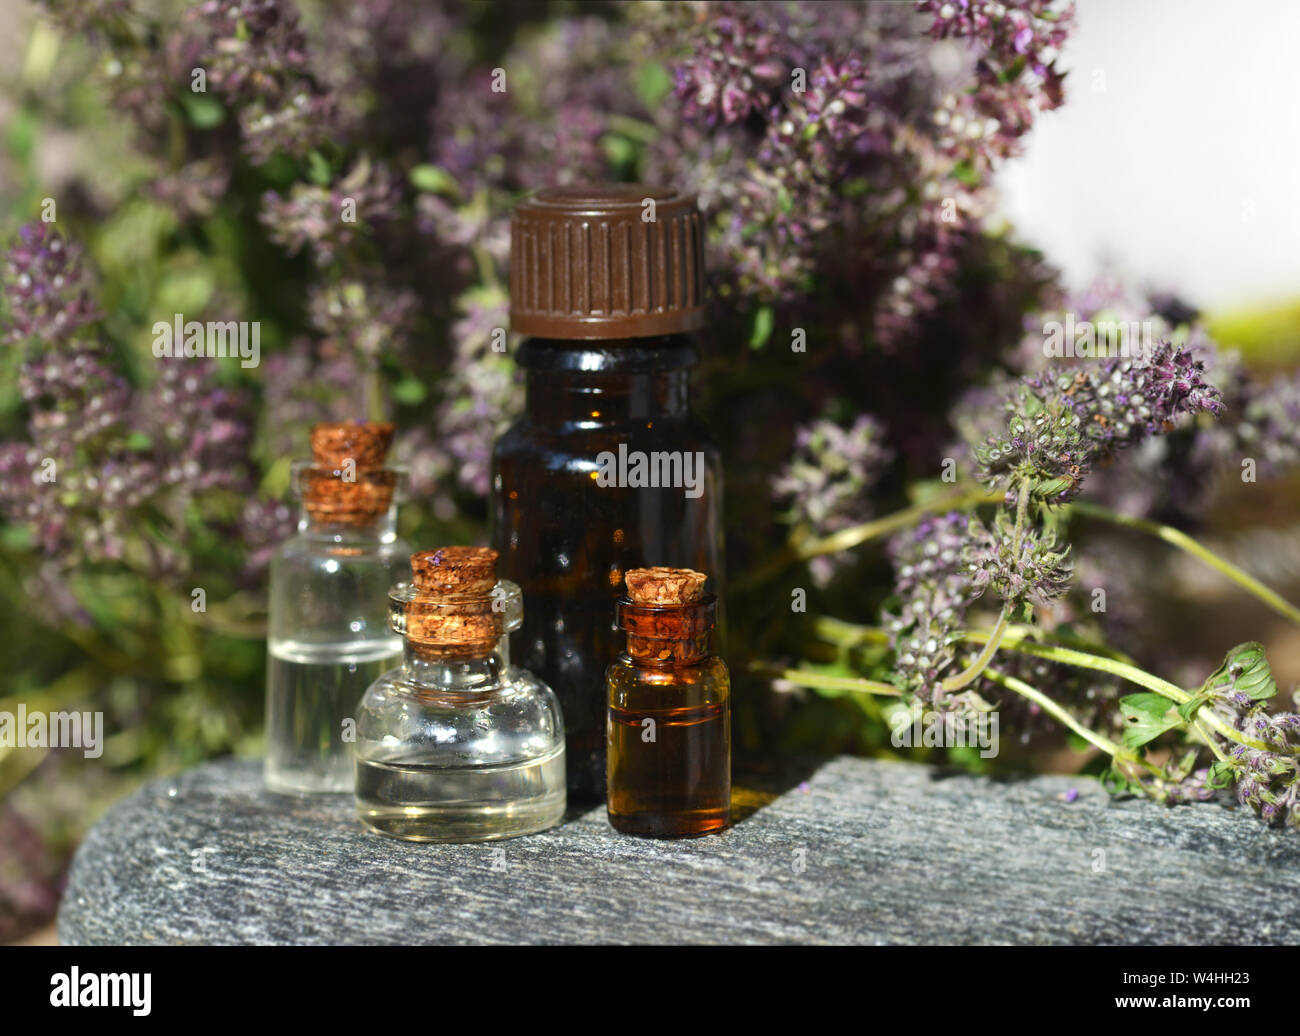 Thyme grass. Bottles of thyme essential oil with fresh thyme twigs and other bottles in the background. Selective focus. Stock Photo